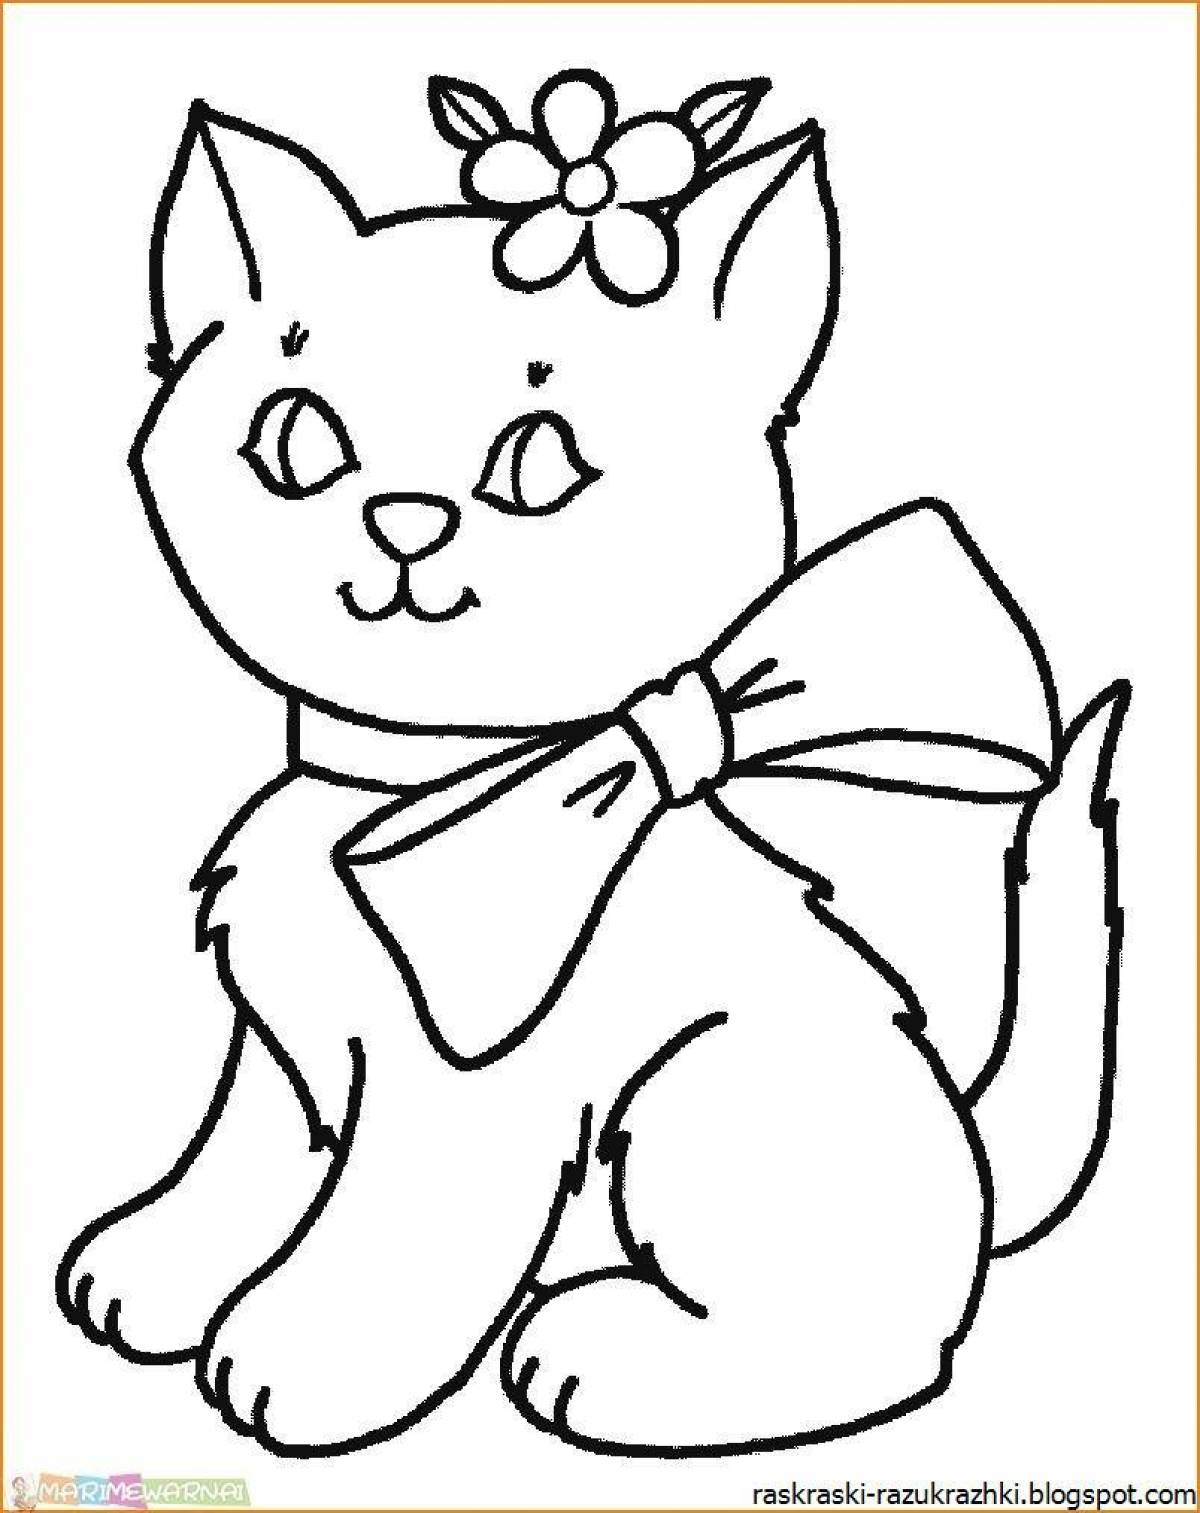 Fun coloring cat for kids 3-4 years old